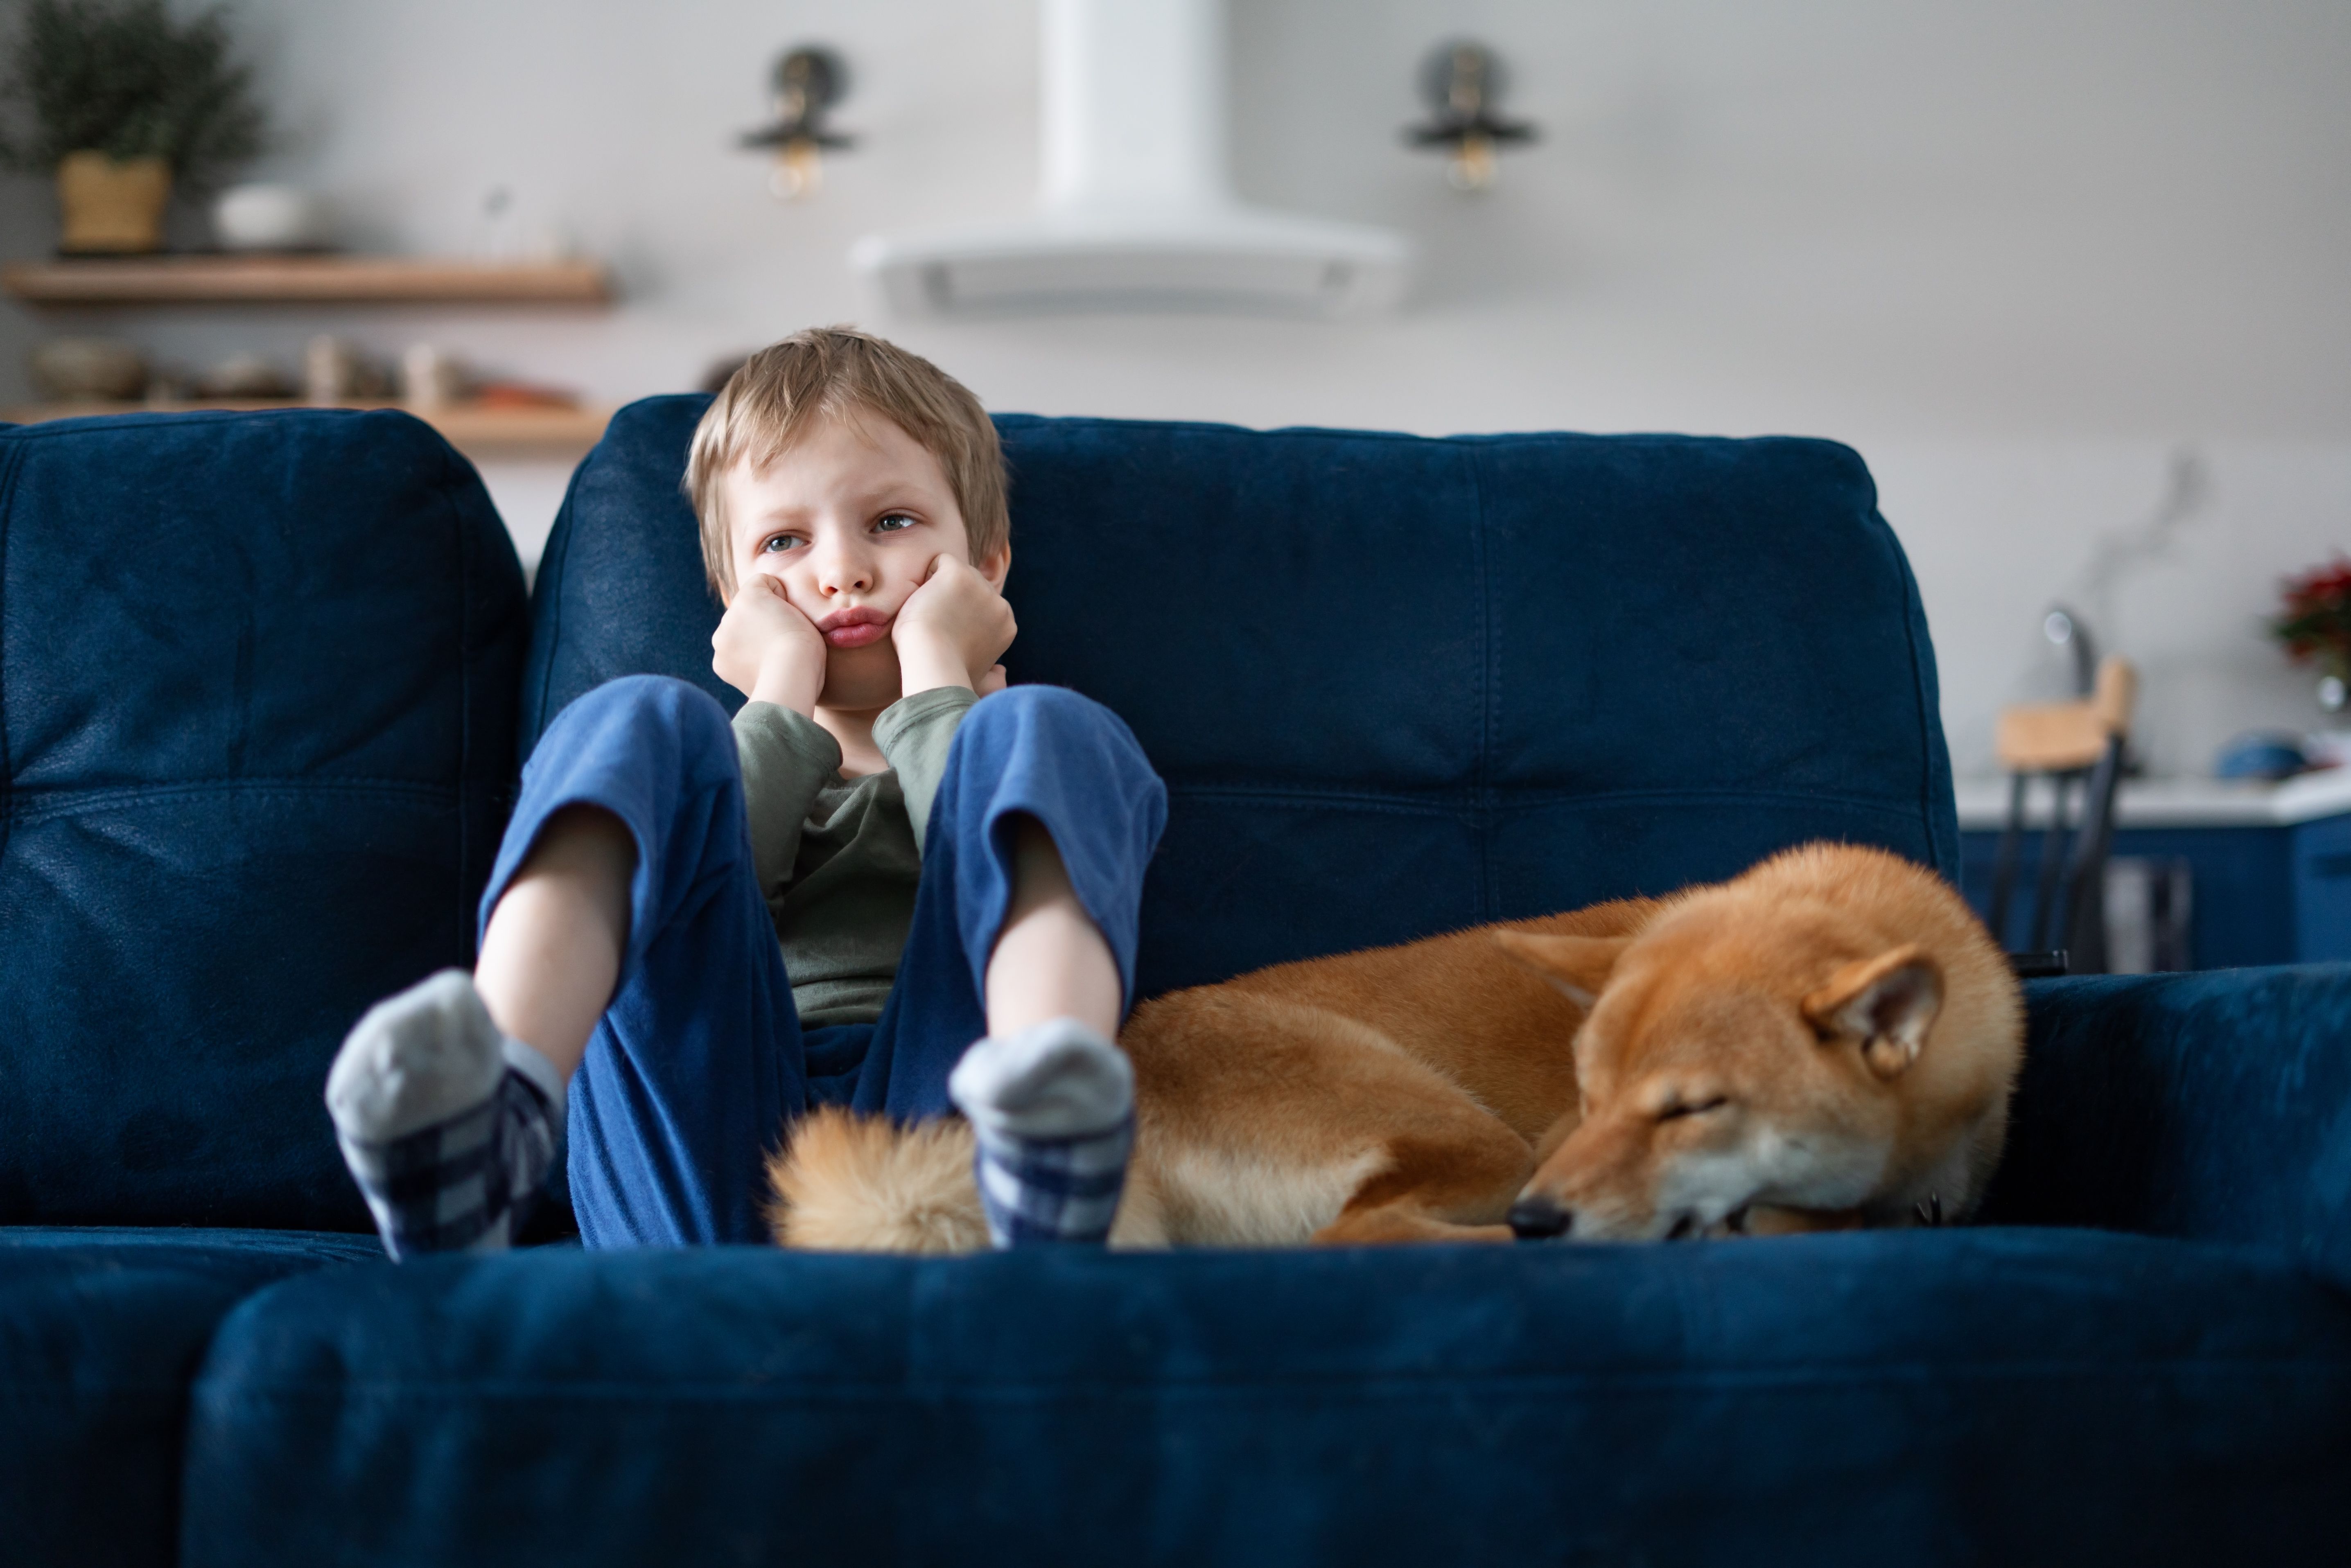 boy sitting on couch bored with sleeping dog